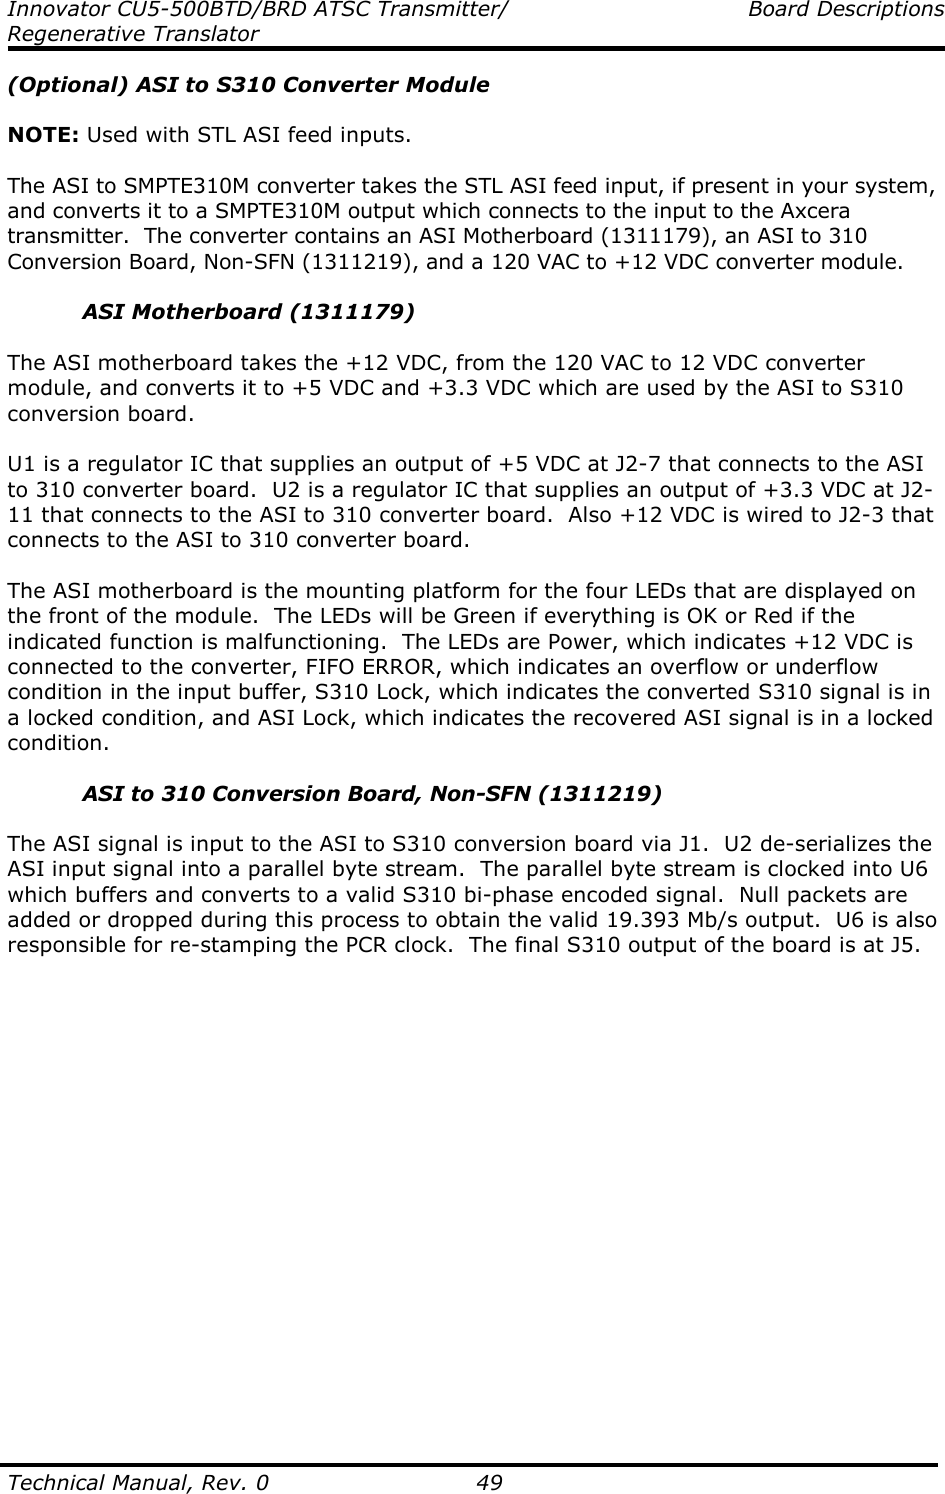 Innovator CU5-500BTD/BRD ATSC Transmitter/  Board Descriptions Regenerative Translator  Technical Manual, Rev. 0    49 (Optional) ASI to S310 Converter Module  NOTE: Used with STL ASI feed inputs.  The ASI to SMPTE310M converter takes the STL ASI feed input, if present in your system, and converts it to a SMPTE310M output which connects to the input to the Axcera transmitter.  The converter contains an ASI Motherboard (1311179), an ASI to 310 Conversion Board, Non-SFN (1311219), and a 120 VAC to +12 VDC converter module.  ASI Motherboard (1311179)  The ASI motherboard takes the +12 VDC, from the 120 VAC to 12 VDC converter module, and converts it to +5 VDC and +3.3 VDC which are used by the ASI to S310 conversion board.  U1 is a regulator IC that supplies an output of +5 VDC at J2-7 that connects to the ASI to 310 converter board.  U2 is a regulator IC that supplies an output of +3.3 VDC at J2-11 that connects to the ASI to 310 converter board.  Also +12 VDC is wired to J2-3 that connects to the ASI to 310 converter board.  The ASI motherboard is the mounting platform for the four LEDs that are displayed on the front of the module.  The LEDs will be Green if everything is OK or Red if the indicated function is malfunctioning.  The LEDs are Power, which indicates +12 VDC is connected to the converter, FIFO ERROR, which indicates an overflow or underflow condition in the input buffer, S310 Lock, which indicates the converted S310 signal is in a locked condition, and ASI Lock, which indicates the recovered ASI signal is in a locked condition.  ASI to 310 Conversion Board, Non-SFN (1311219)  The ASI signal is input to the ASI to S310 conversion board via J1.  U2 de-serializes the ASI input signal into a parallel byte stream.  The parallel byte stream is clocked into U6 which buffers and converts to a valid S310 bi-phase encoded signal.  Null packets are added or dropped during this process to obtain the valid 19.393 Mb/s output.  U6 is also responsible for re-stamping the PCR clock.  The final S310 output of the board is at J5.          